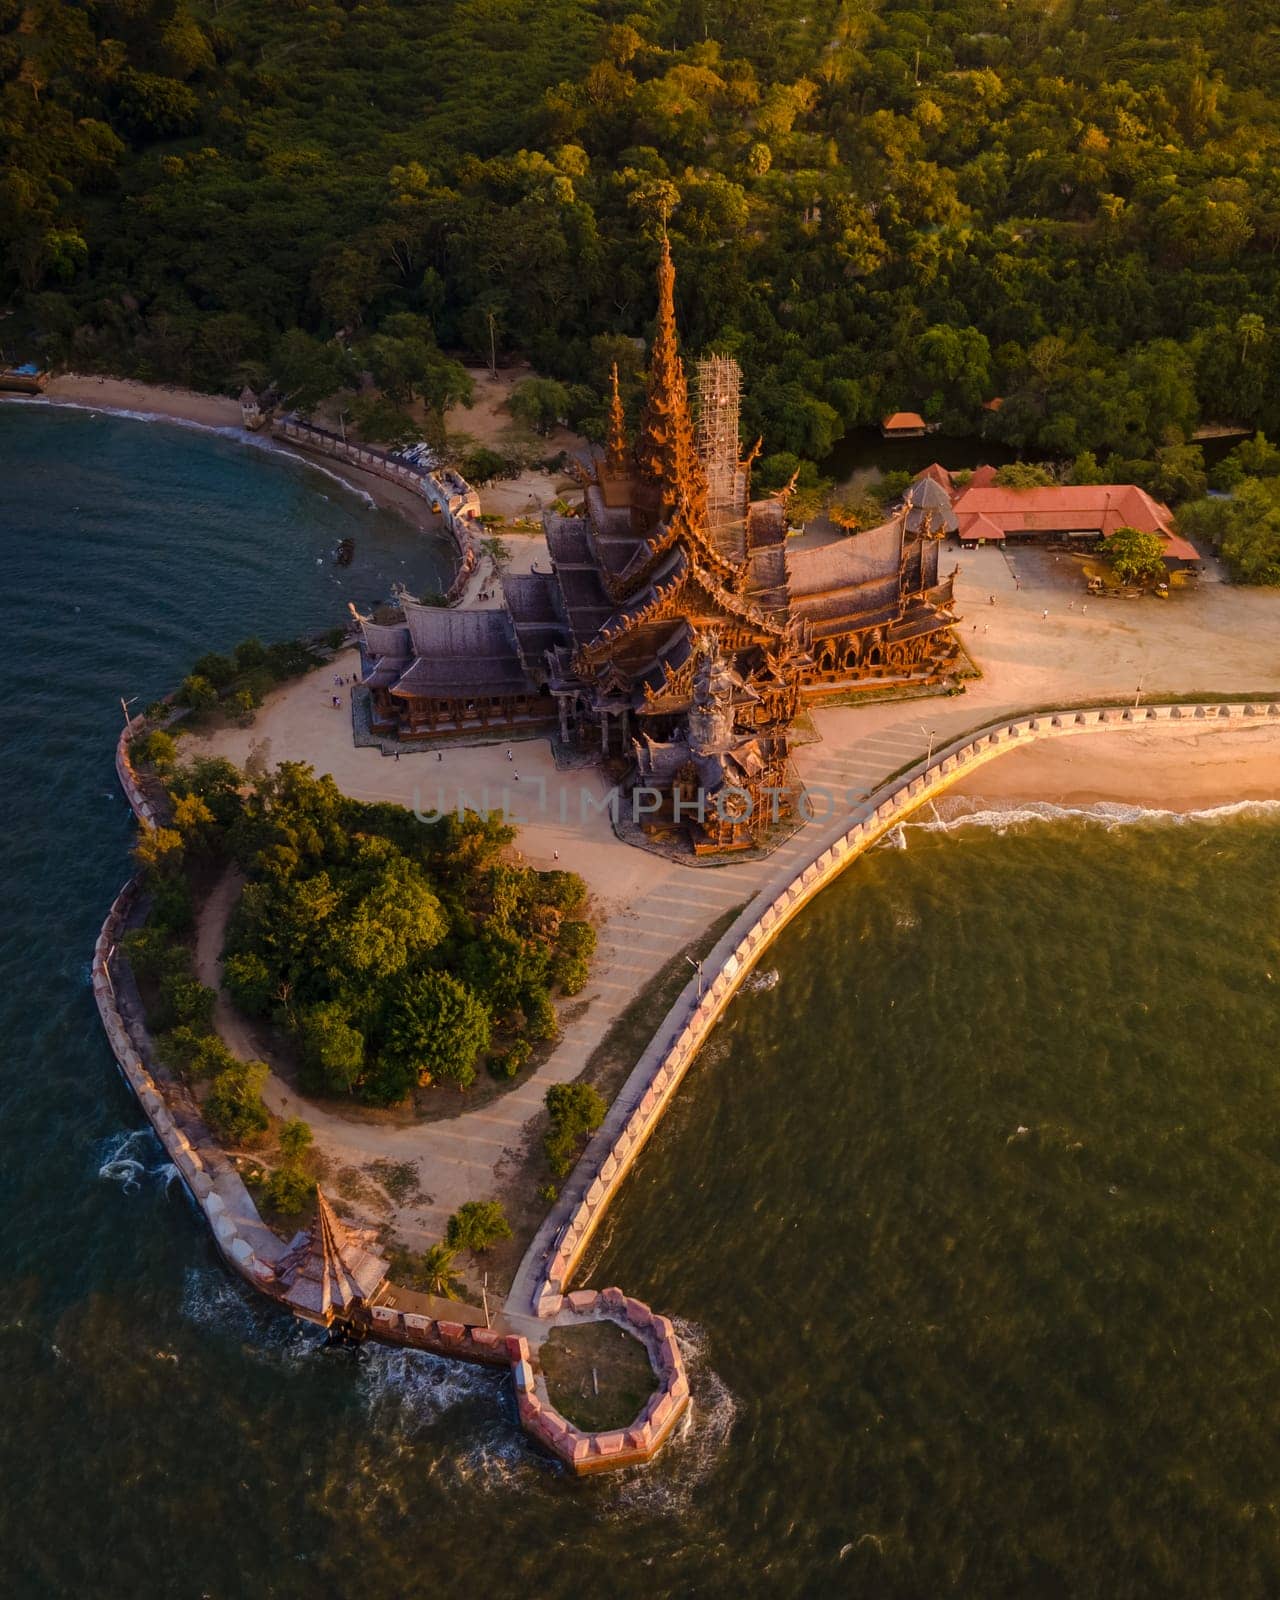 The Sanctuary of Truth wooden temple in Pattaya Thailand in the warm evening light at sunset